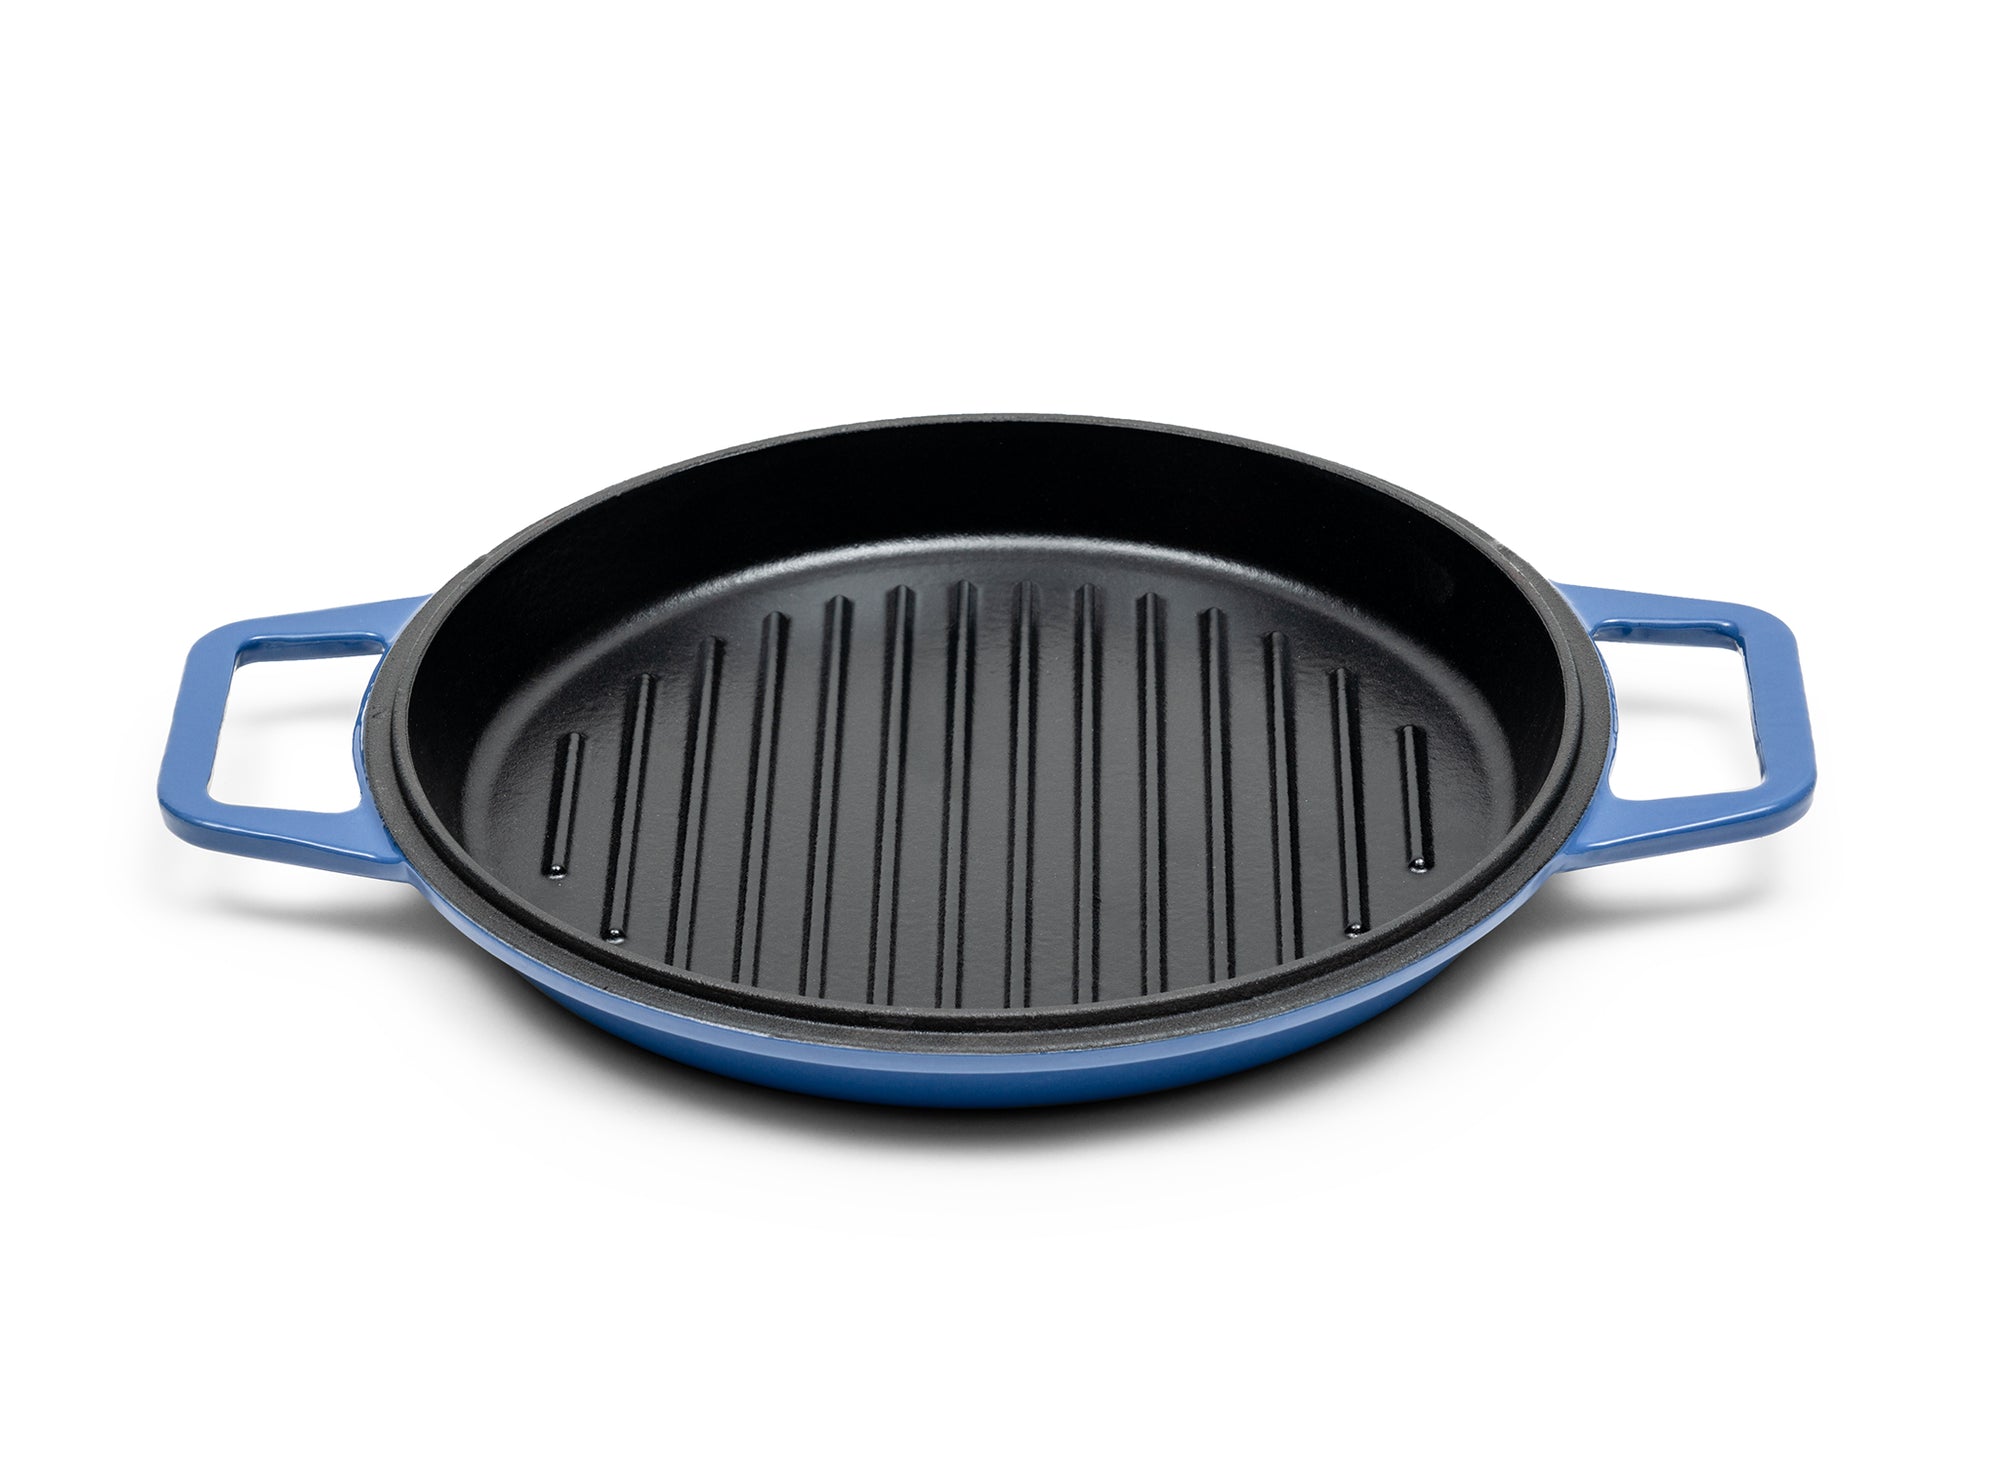 Blue Grill Lid for 7-quart Dutch oven face up on white background, showing black enamel interior with raised grill lines.